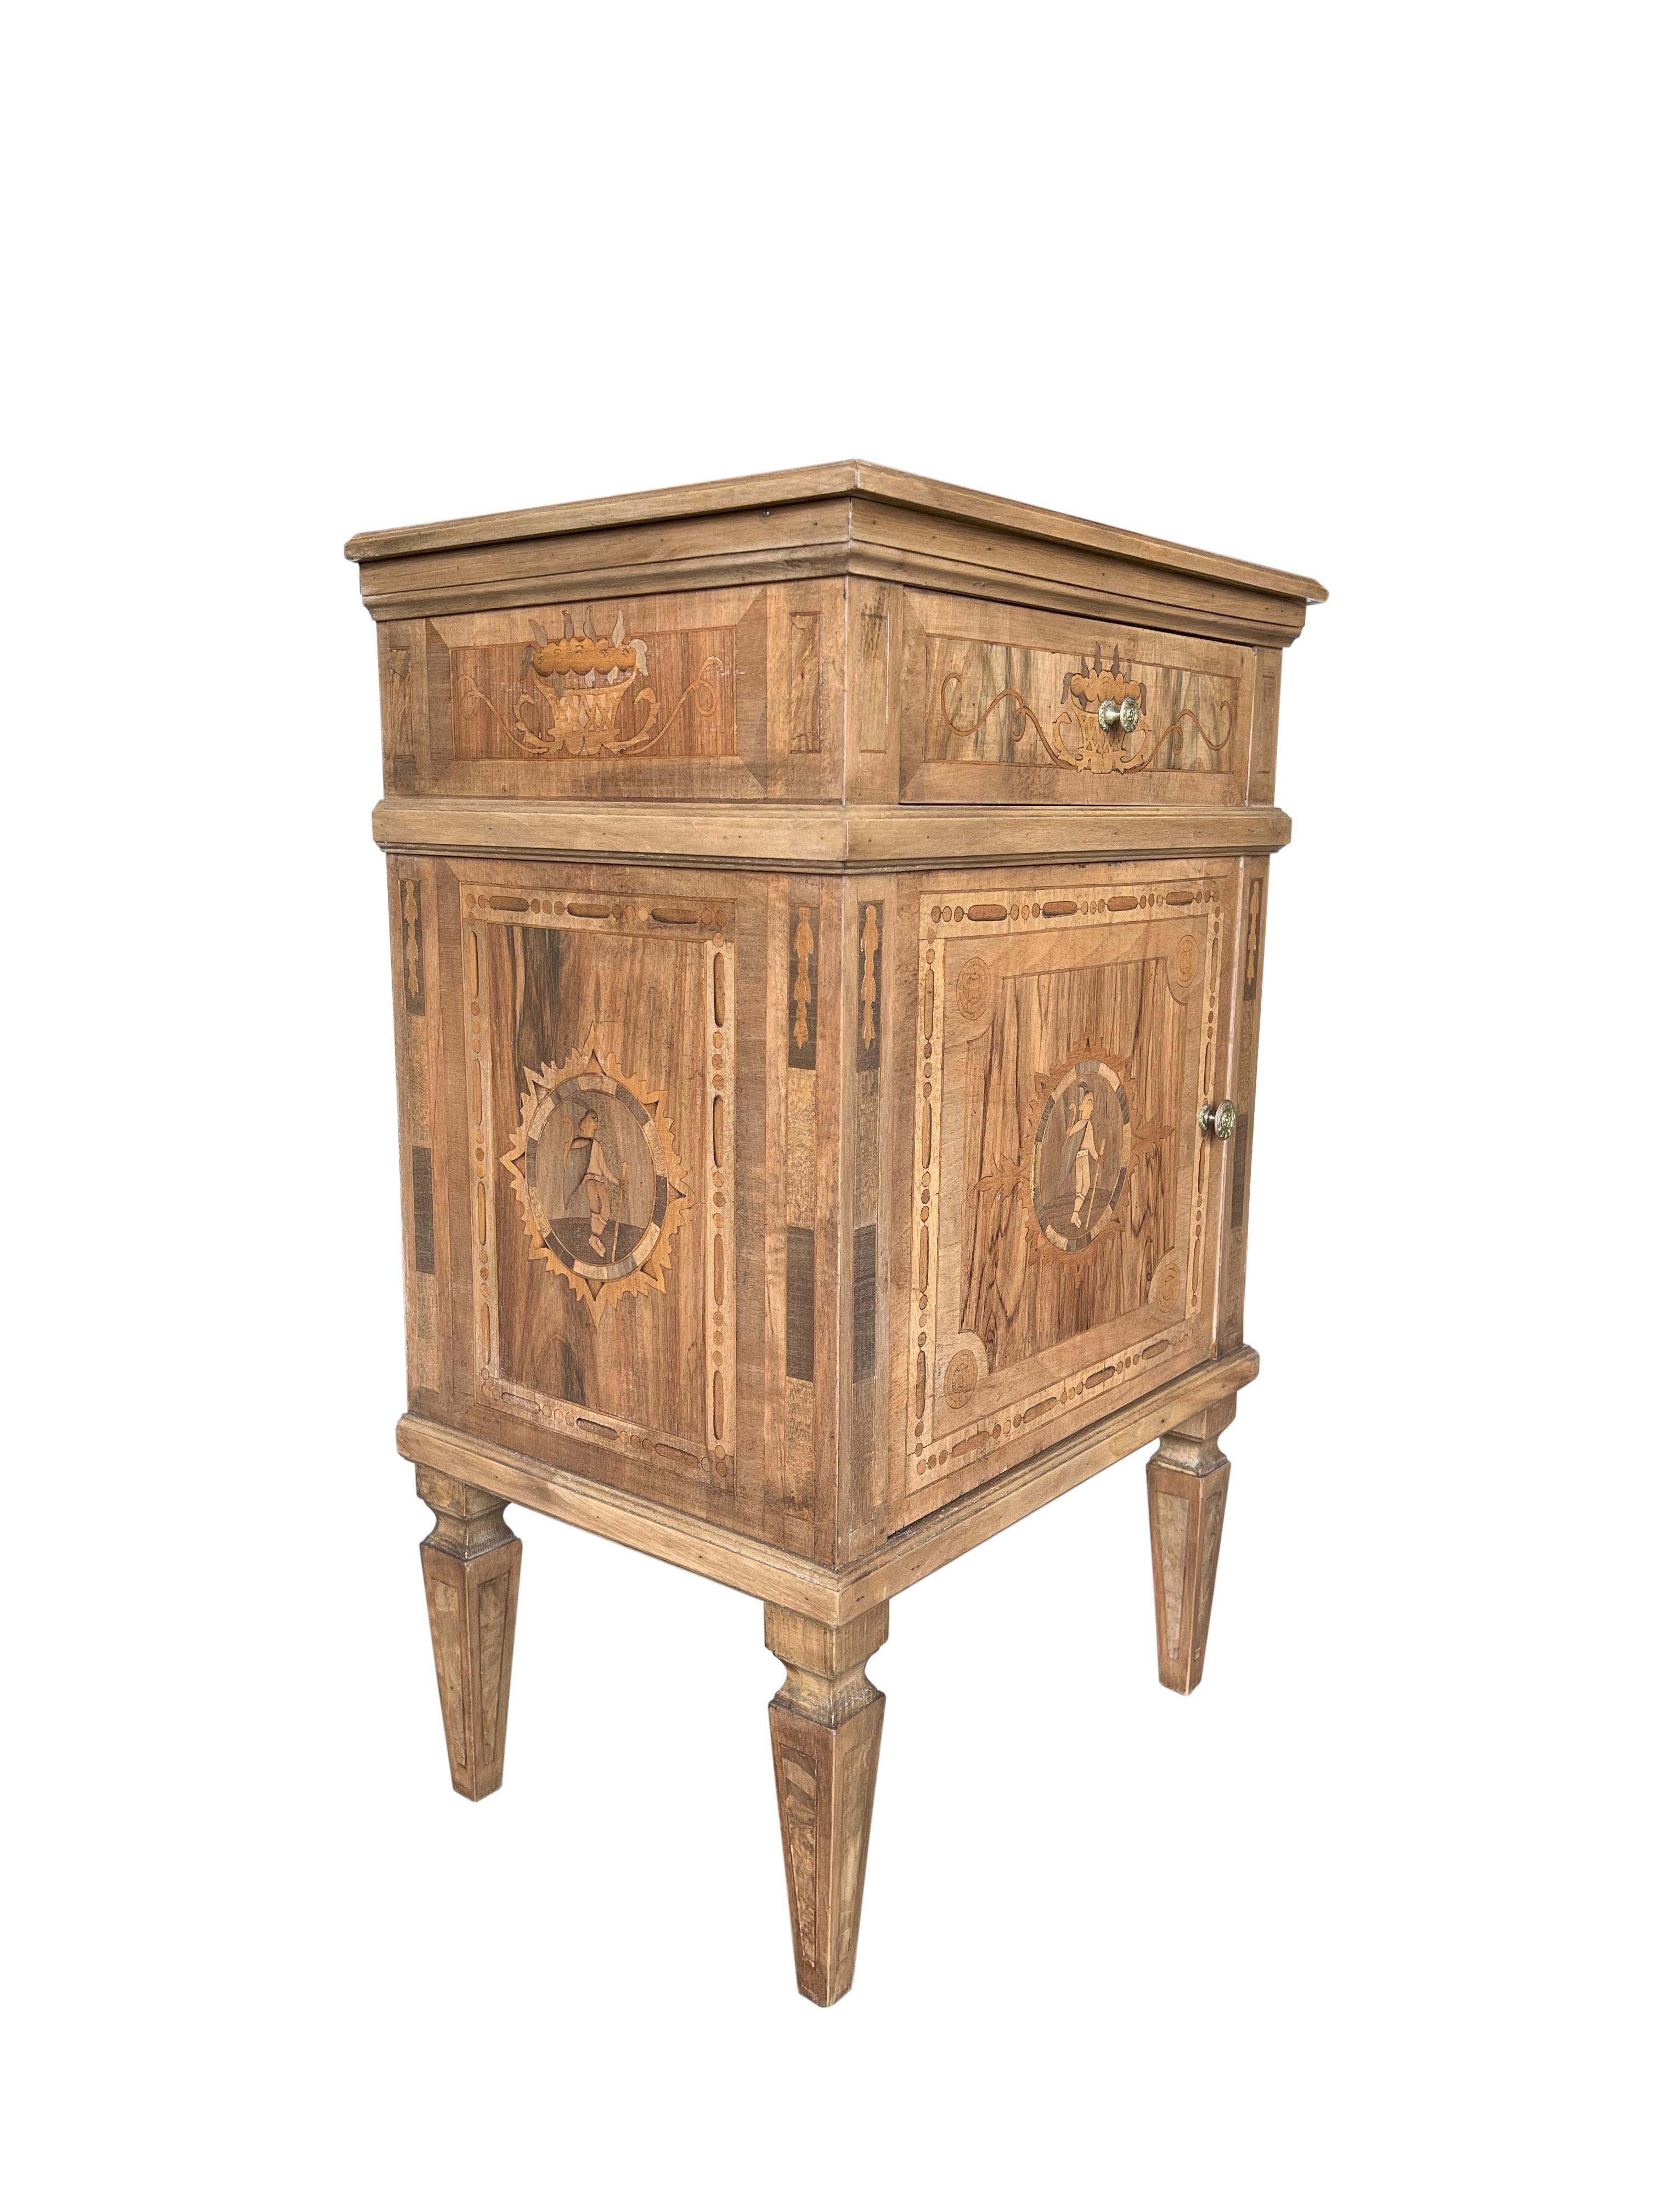 Louis XVI Style Tuscan Italian Walnut Nightstand Pair with Inlay Marquetry   In Good Condition For Sale In Encinitas, CA